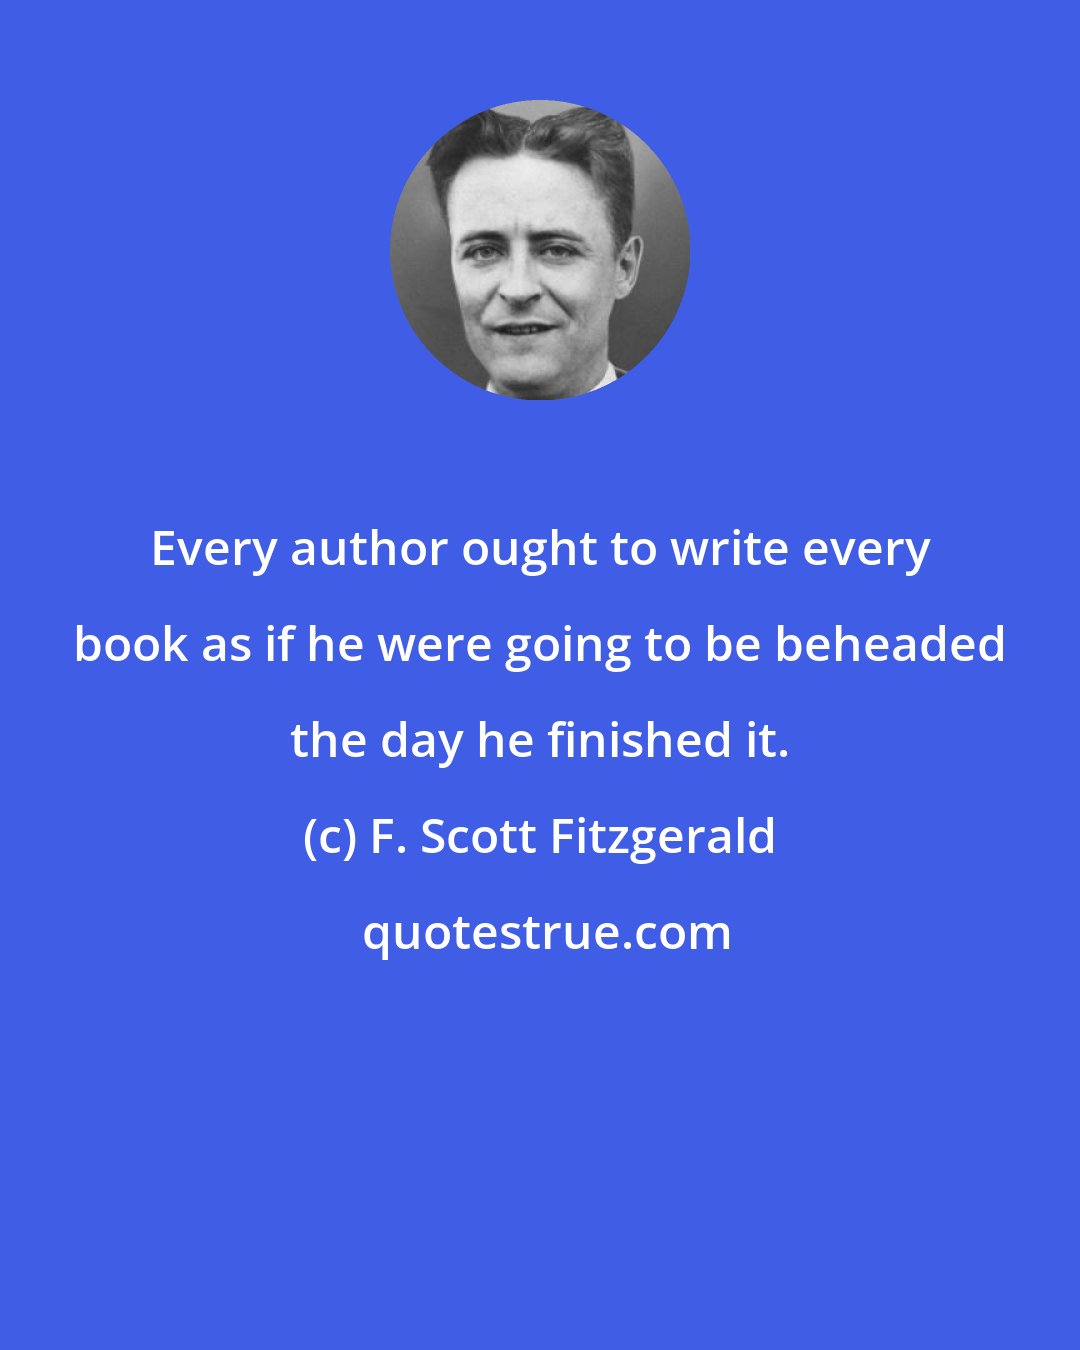 F. Scott Fitzgerald: Every author ought to write every book as if he were going to be beheaded the day he finished it.